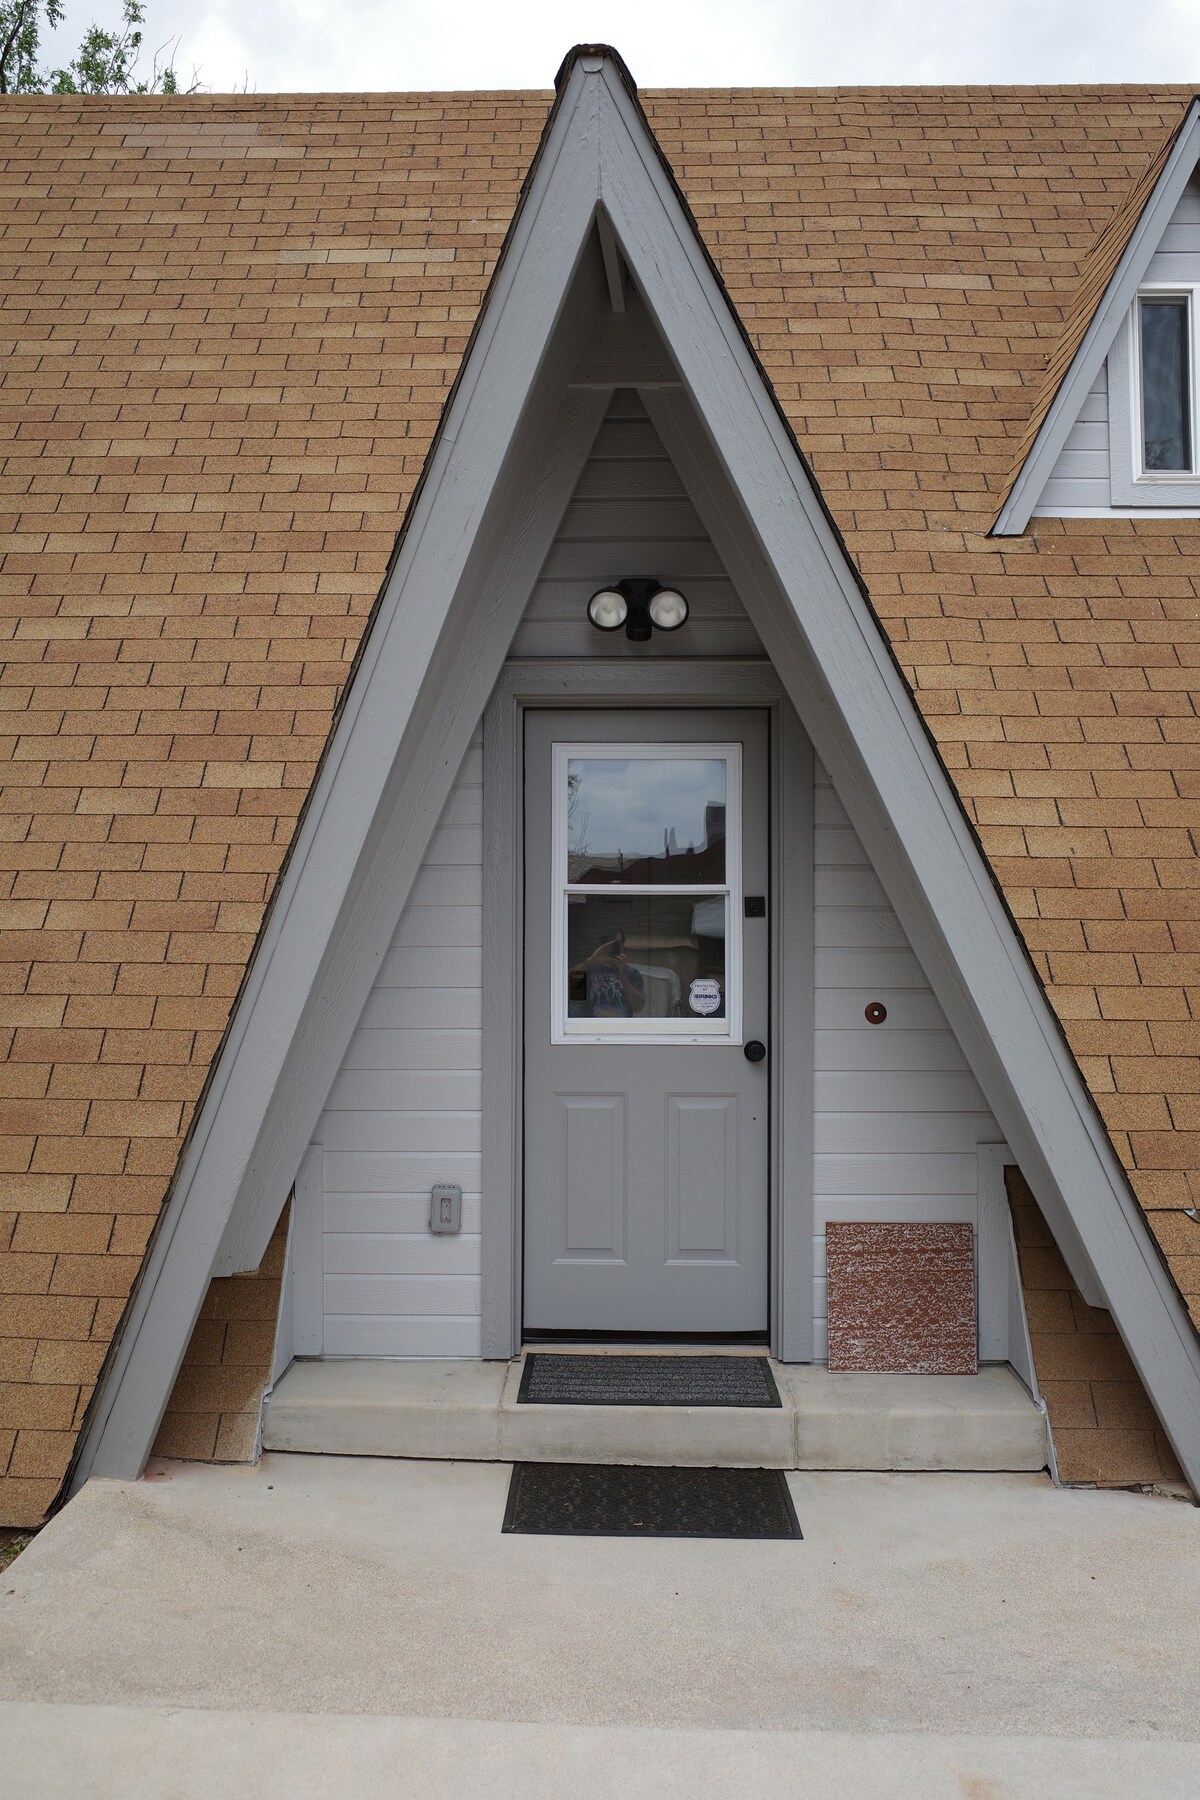 Unique 1960s Completely Remodeled A-frame!